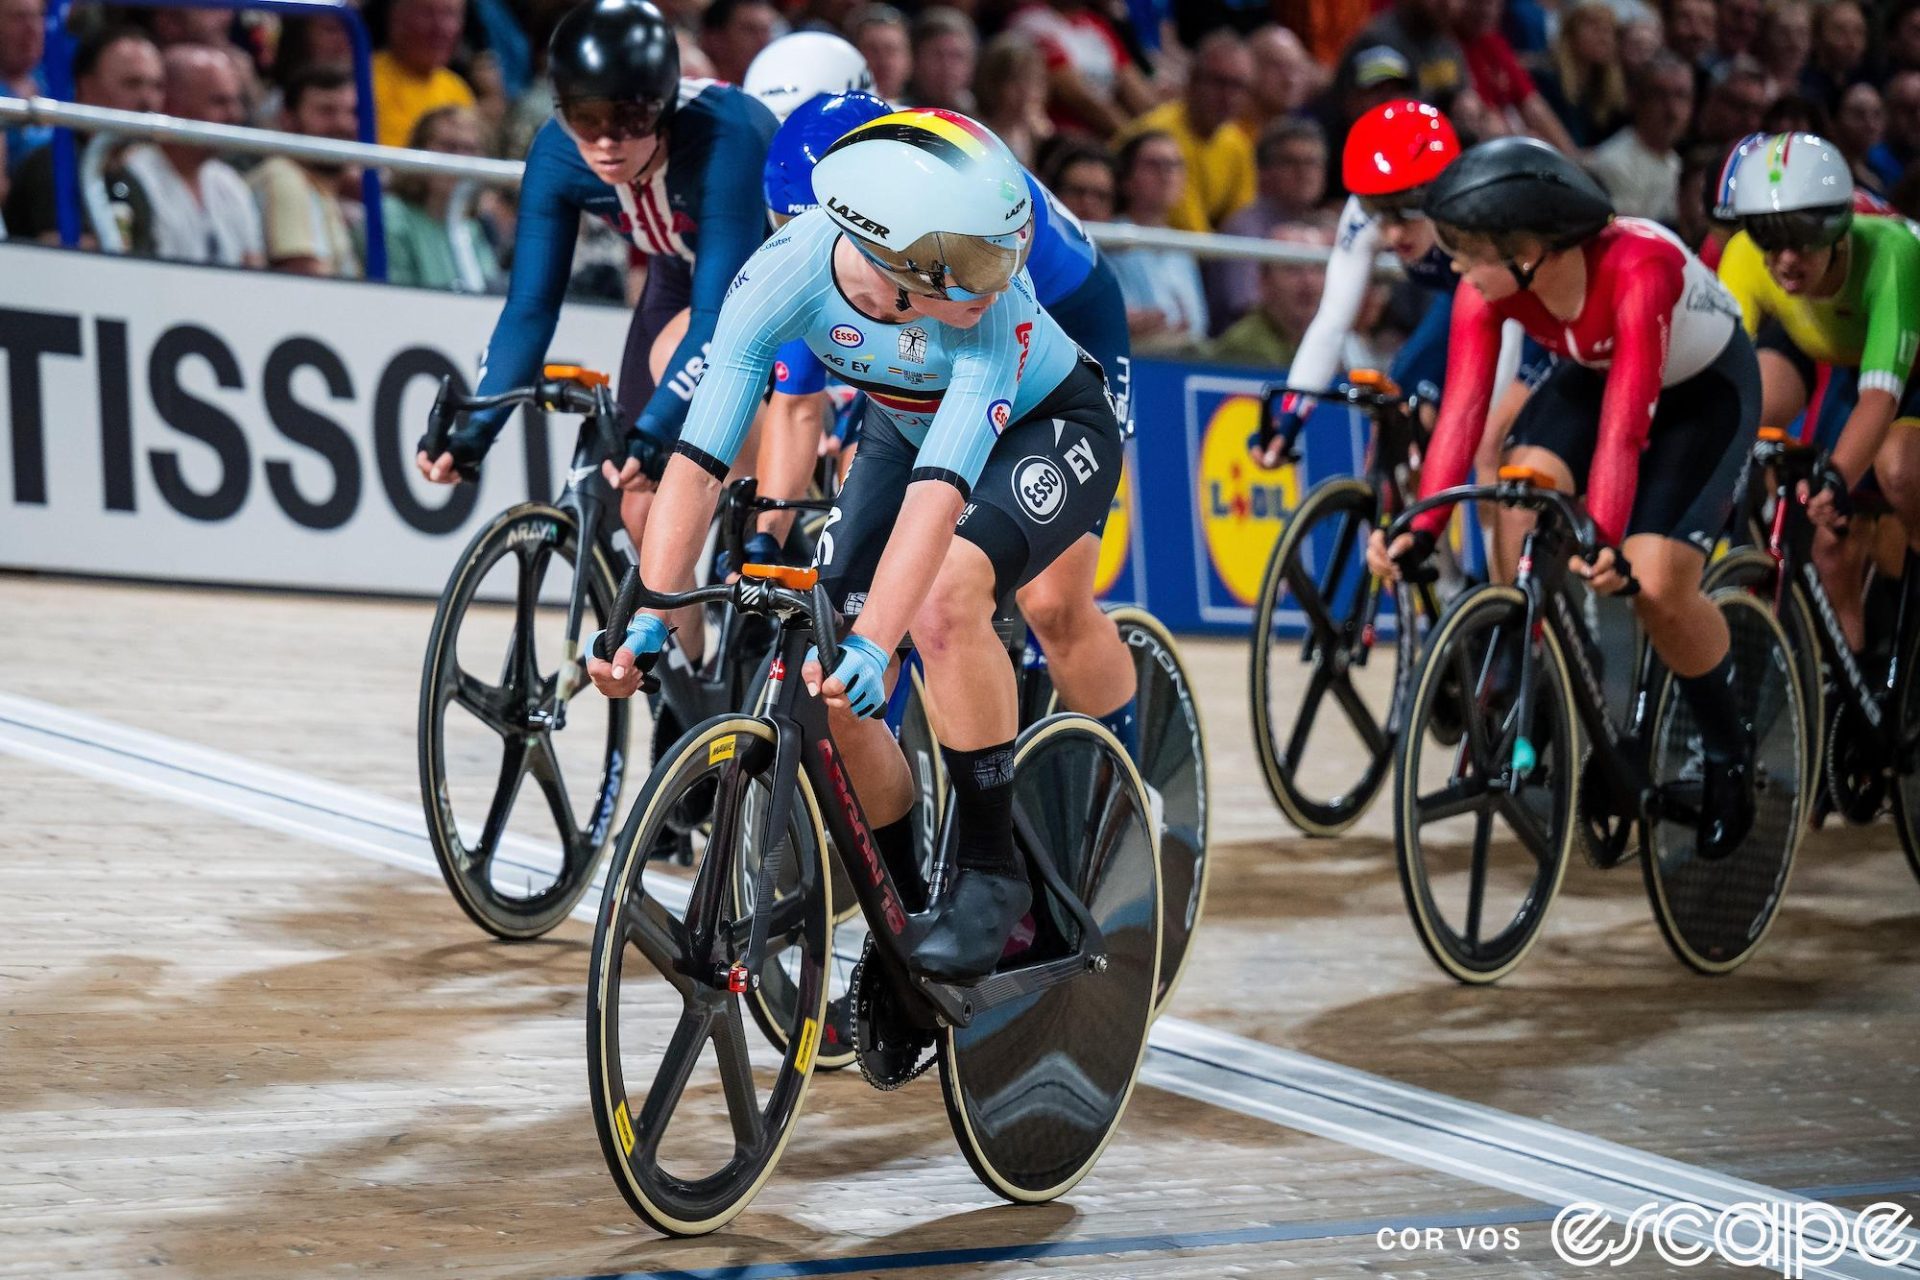 Lotte Kopecky races the Elimination Race at the 2023 World Track Championships in Glasgow. She's at the front of the field, looking over her left shoulder at the pack. Over her right shoulder and behind her, reigning Omnium champion Jennifer Valente in a Team USA skinsuit keeps a watchful eye.